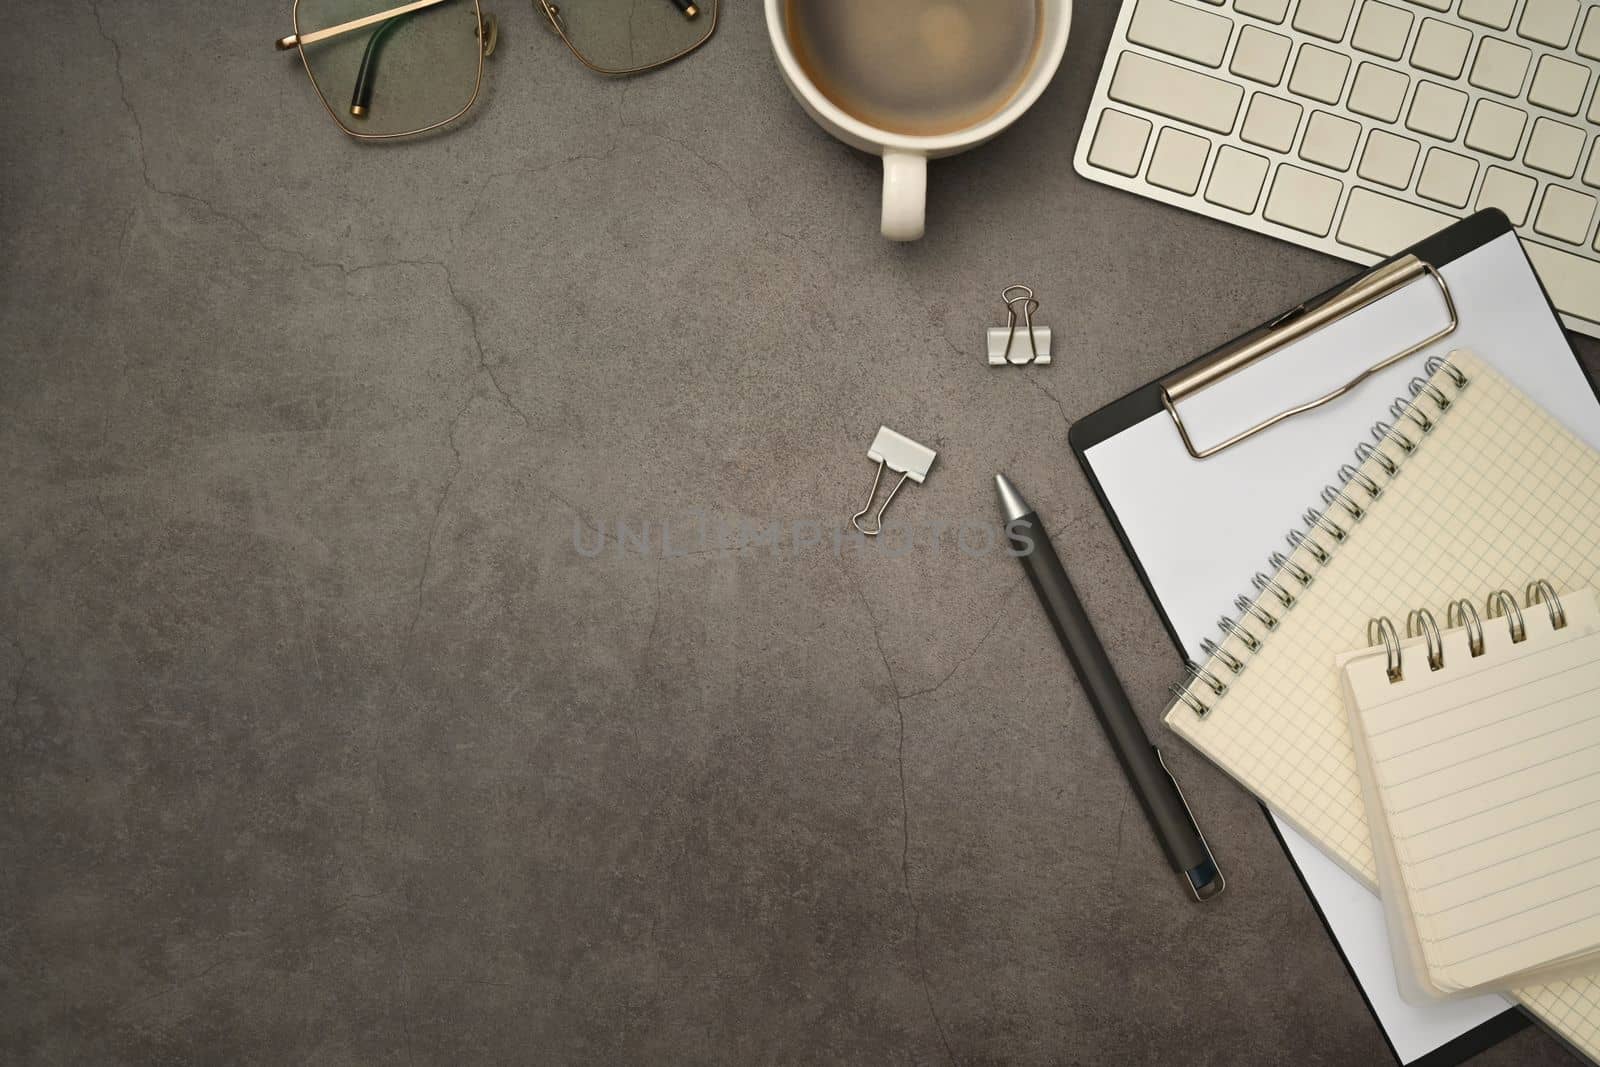 Stylish workplace with cup of coffee, keyboard, blank notepad and glasses on black slate texture background.